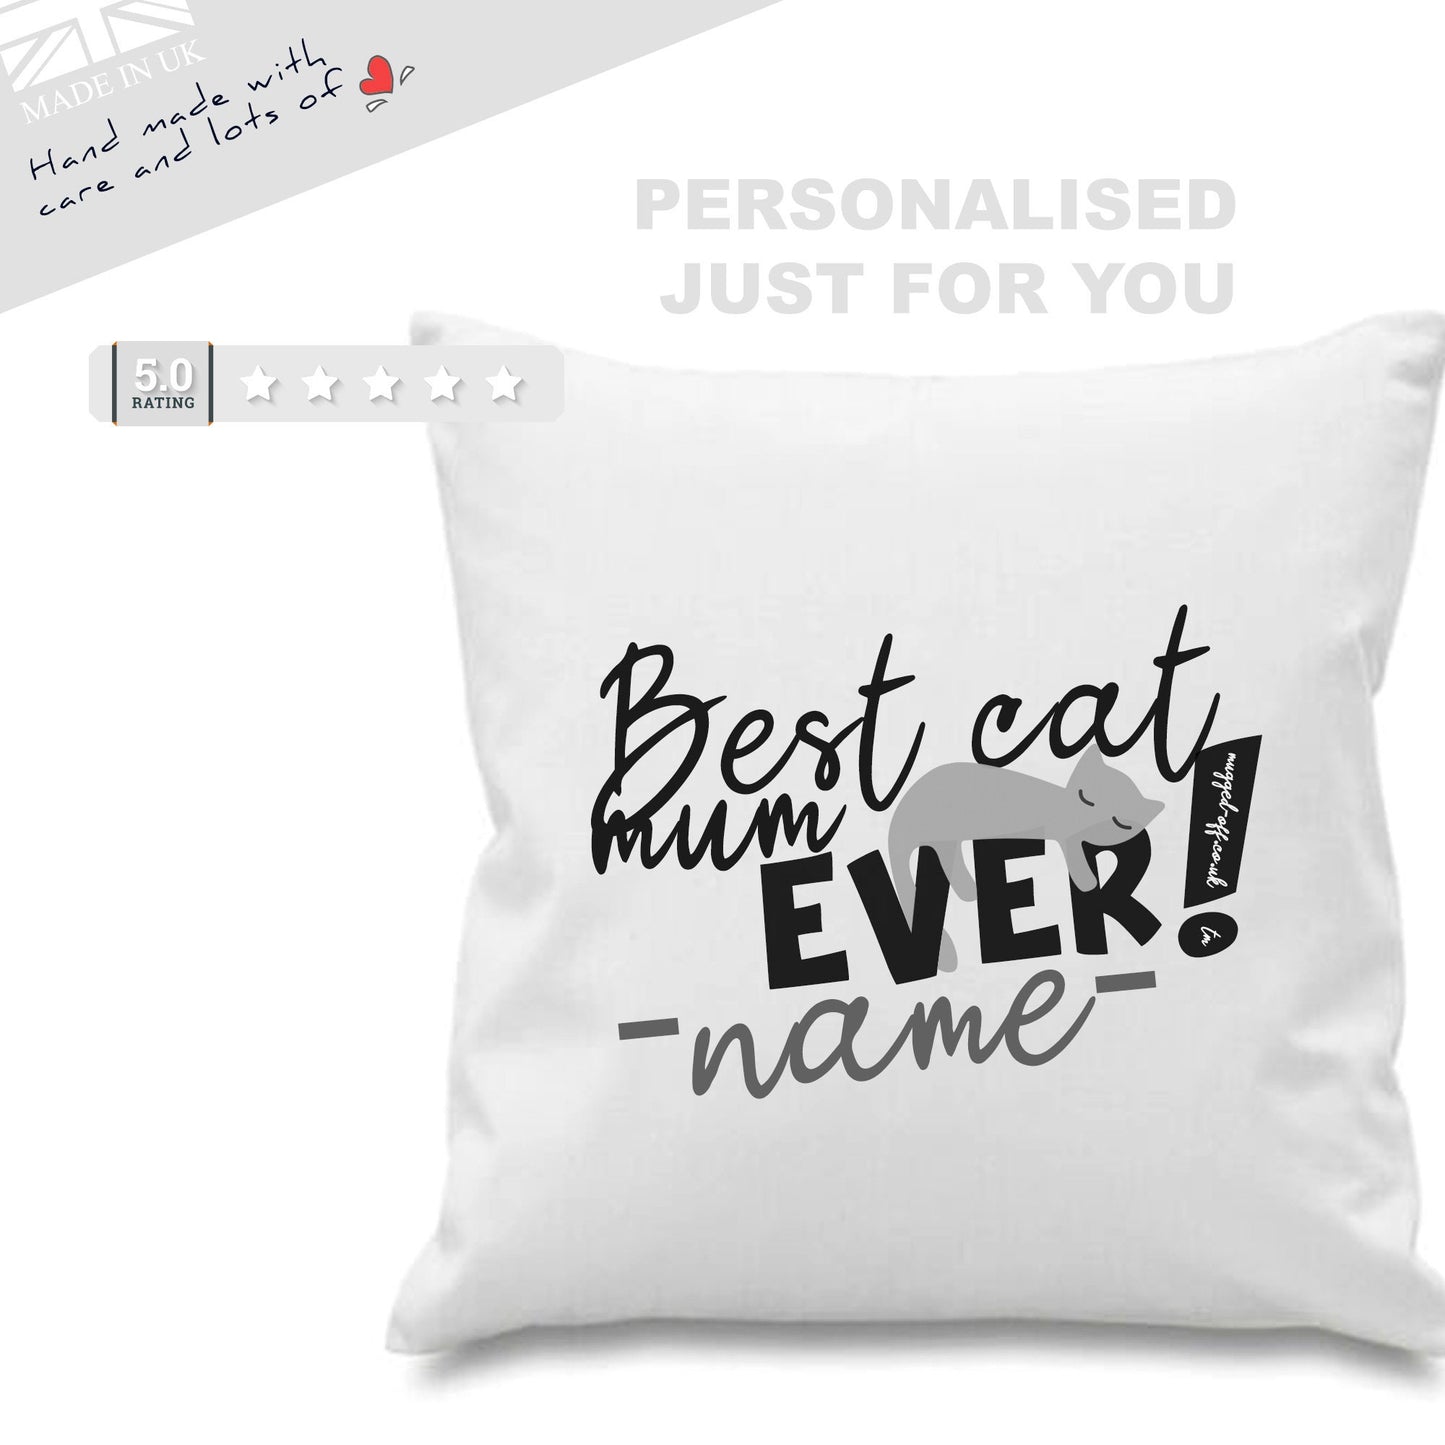 Cat Mum Cushion Covers - cushion covers personalised - mothers day gifts xmas birthday